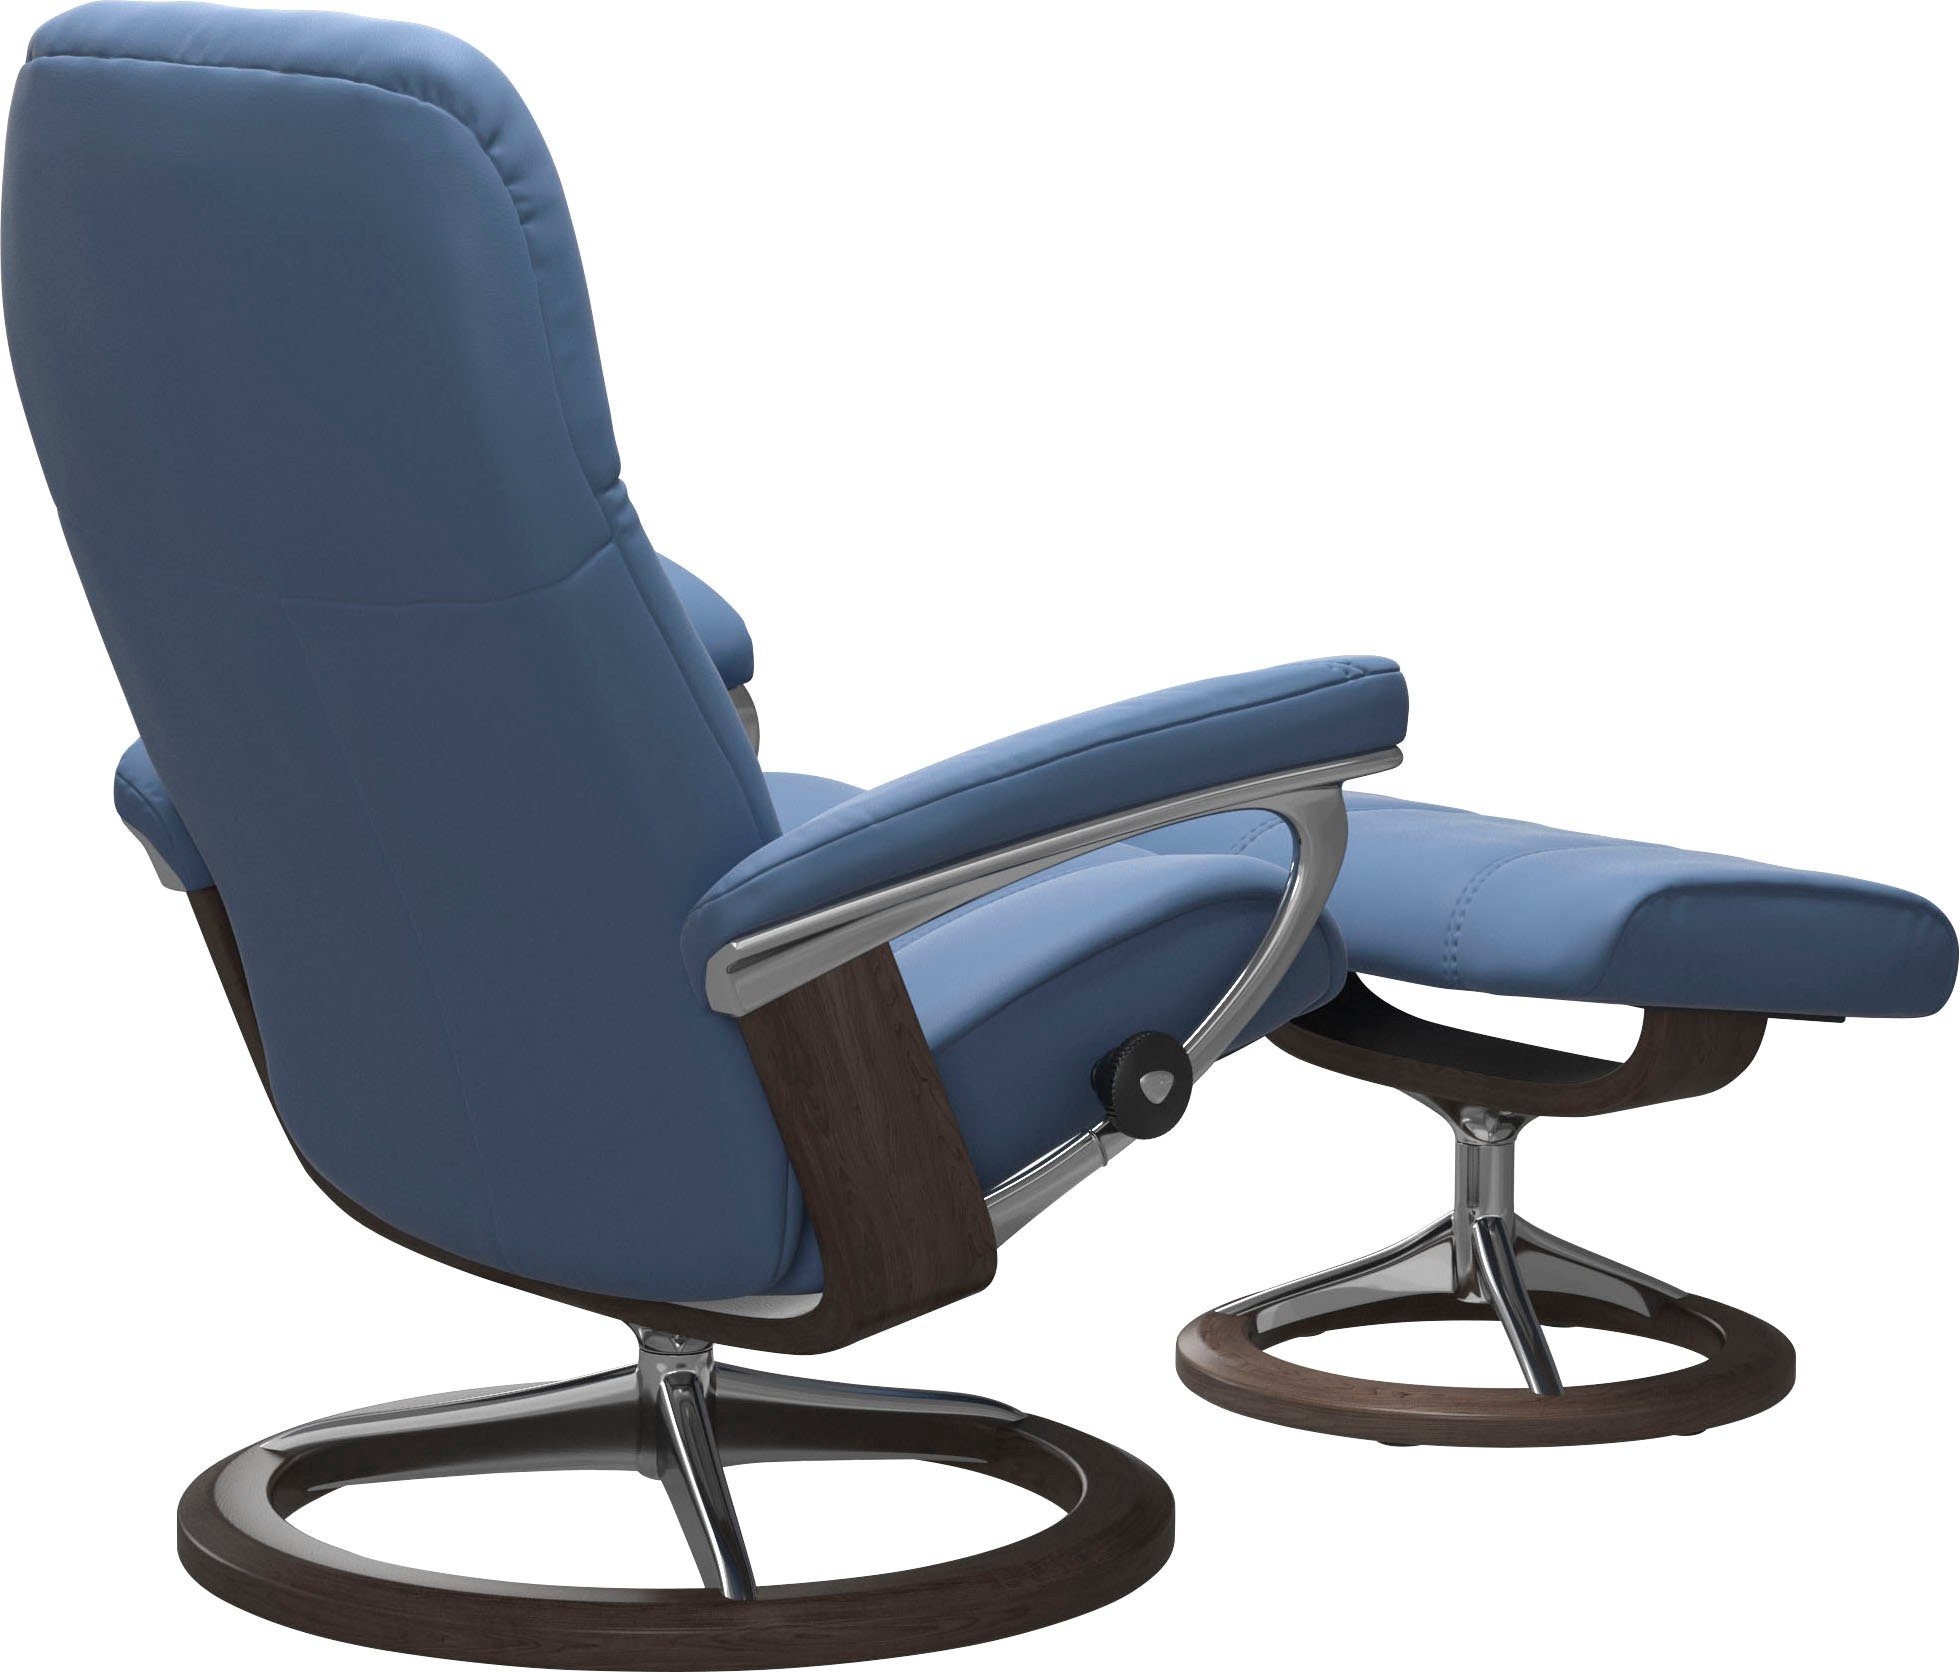 Consul, Wenge Gestell Signature Größe Relaxsessel mit Base, Stressless® L,